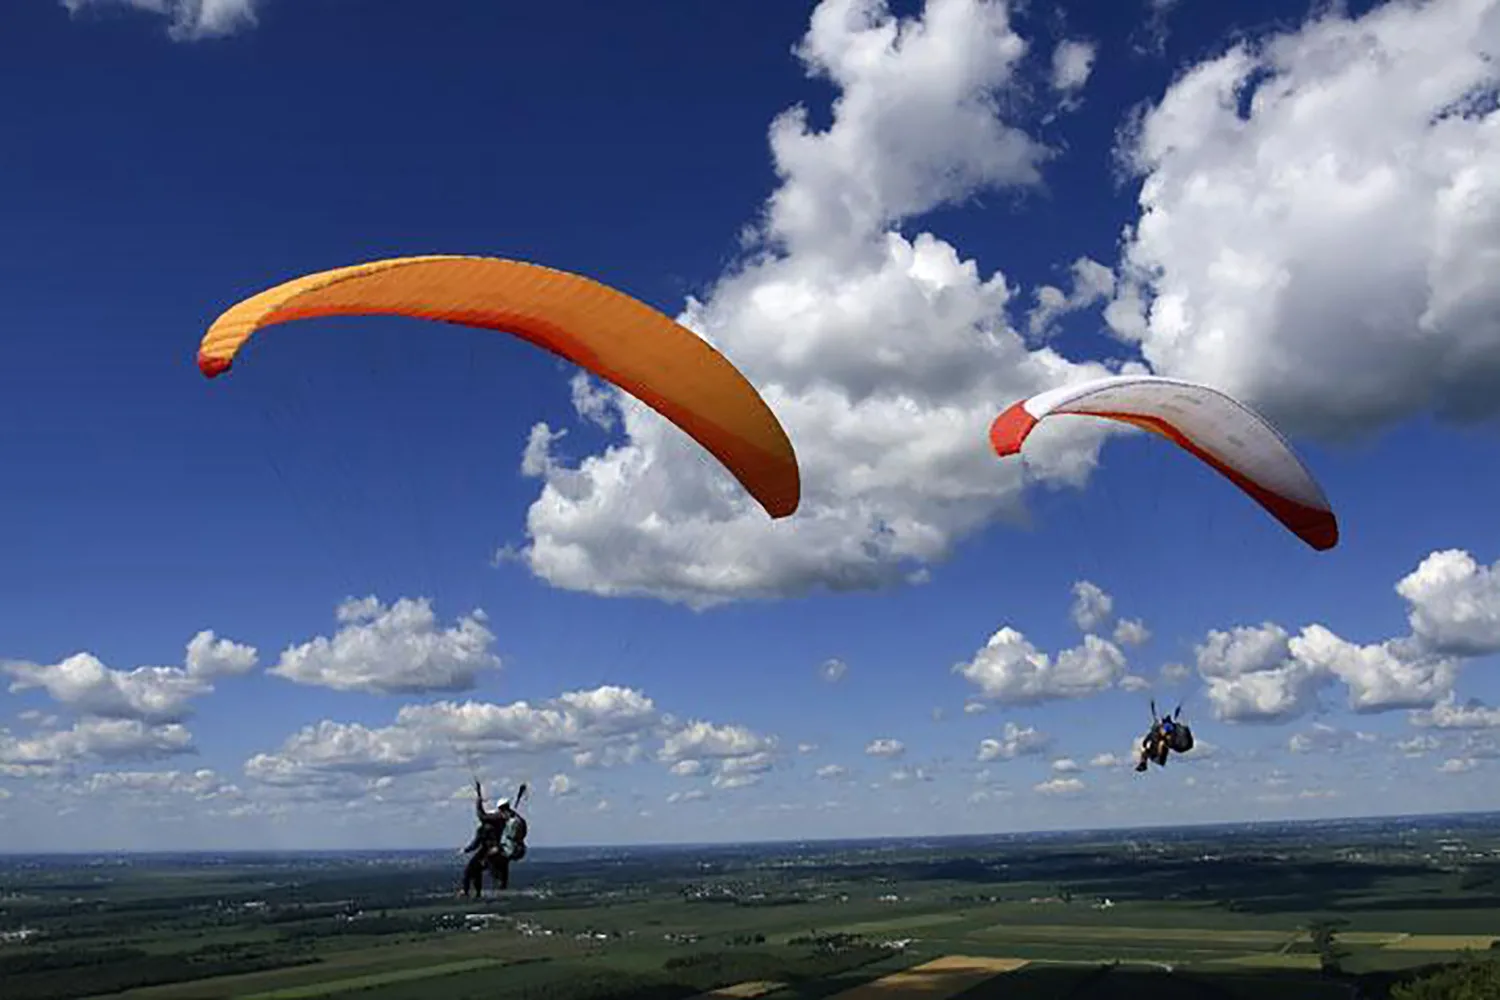 Paragliding Adventure What To Get Your Boyfriend For Christmas